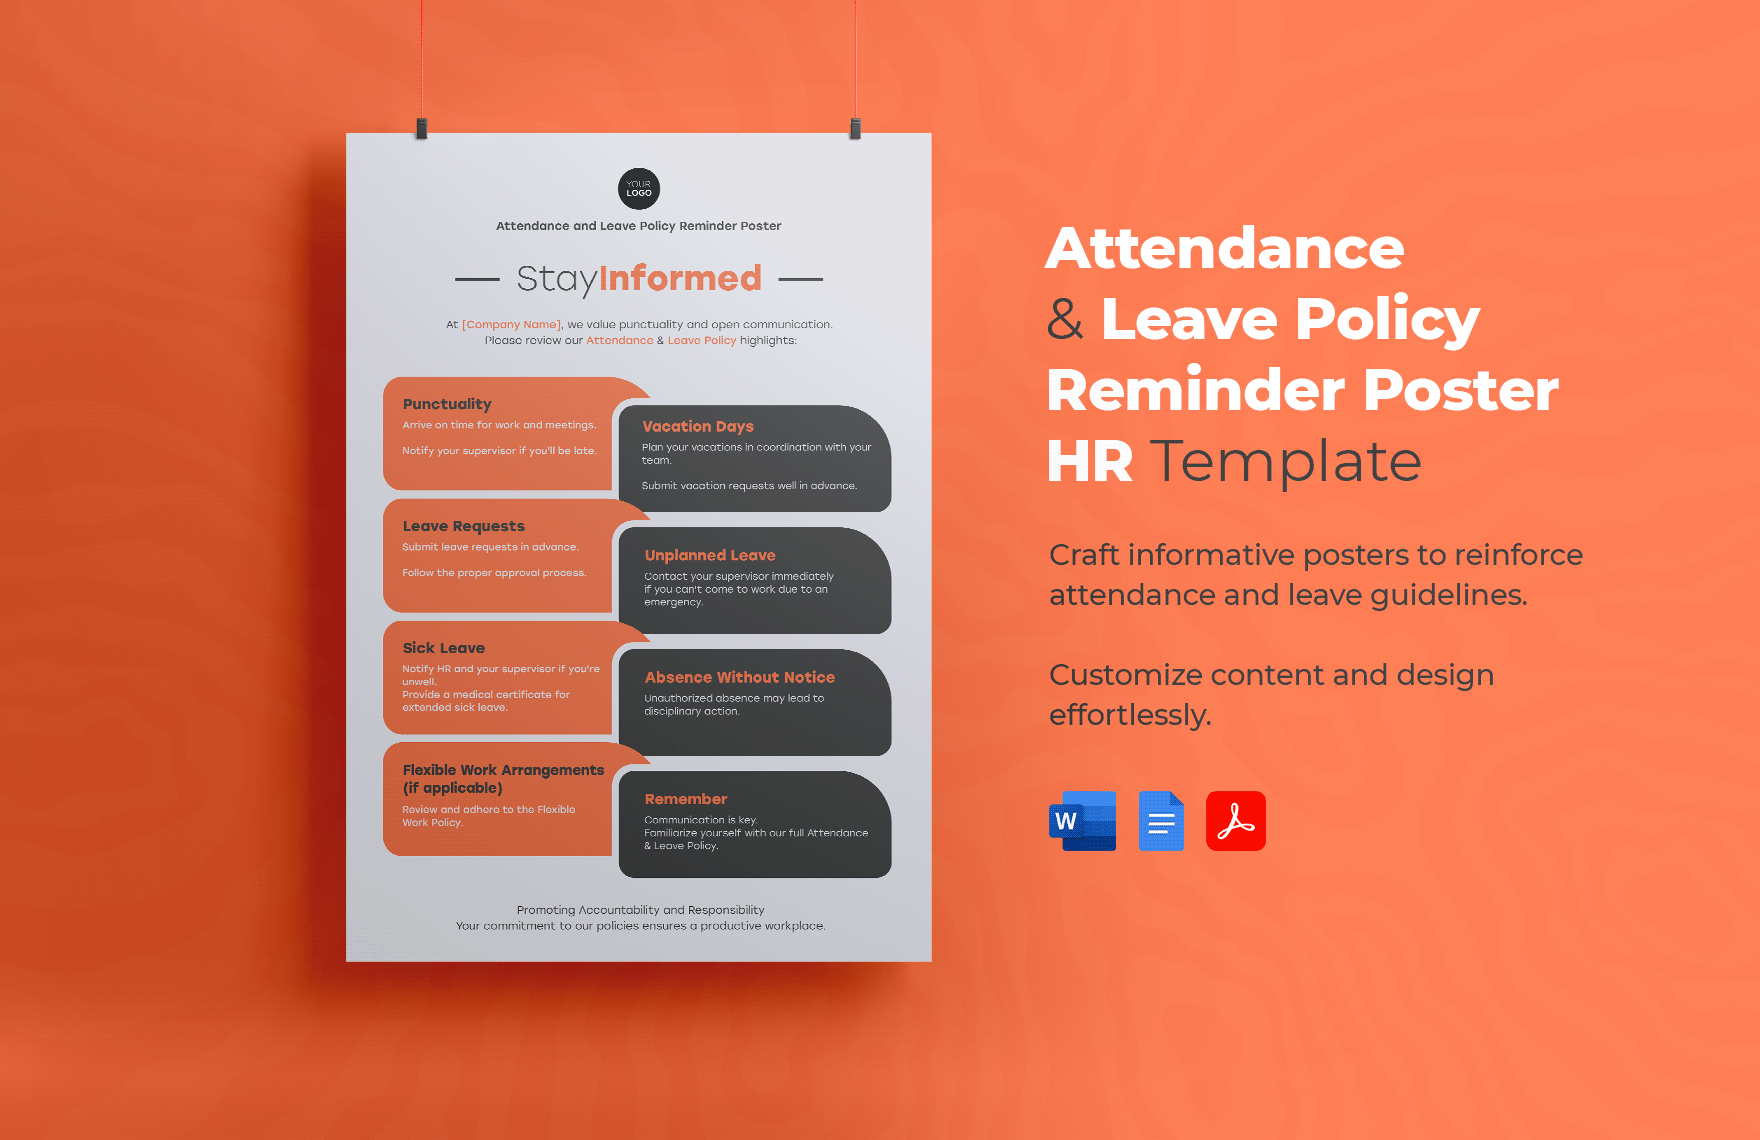 Attendance and Leave Policy Reminder Poster HR Template